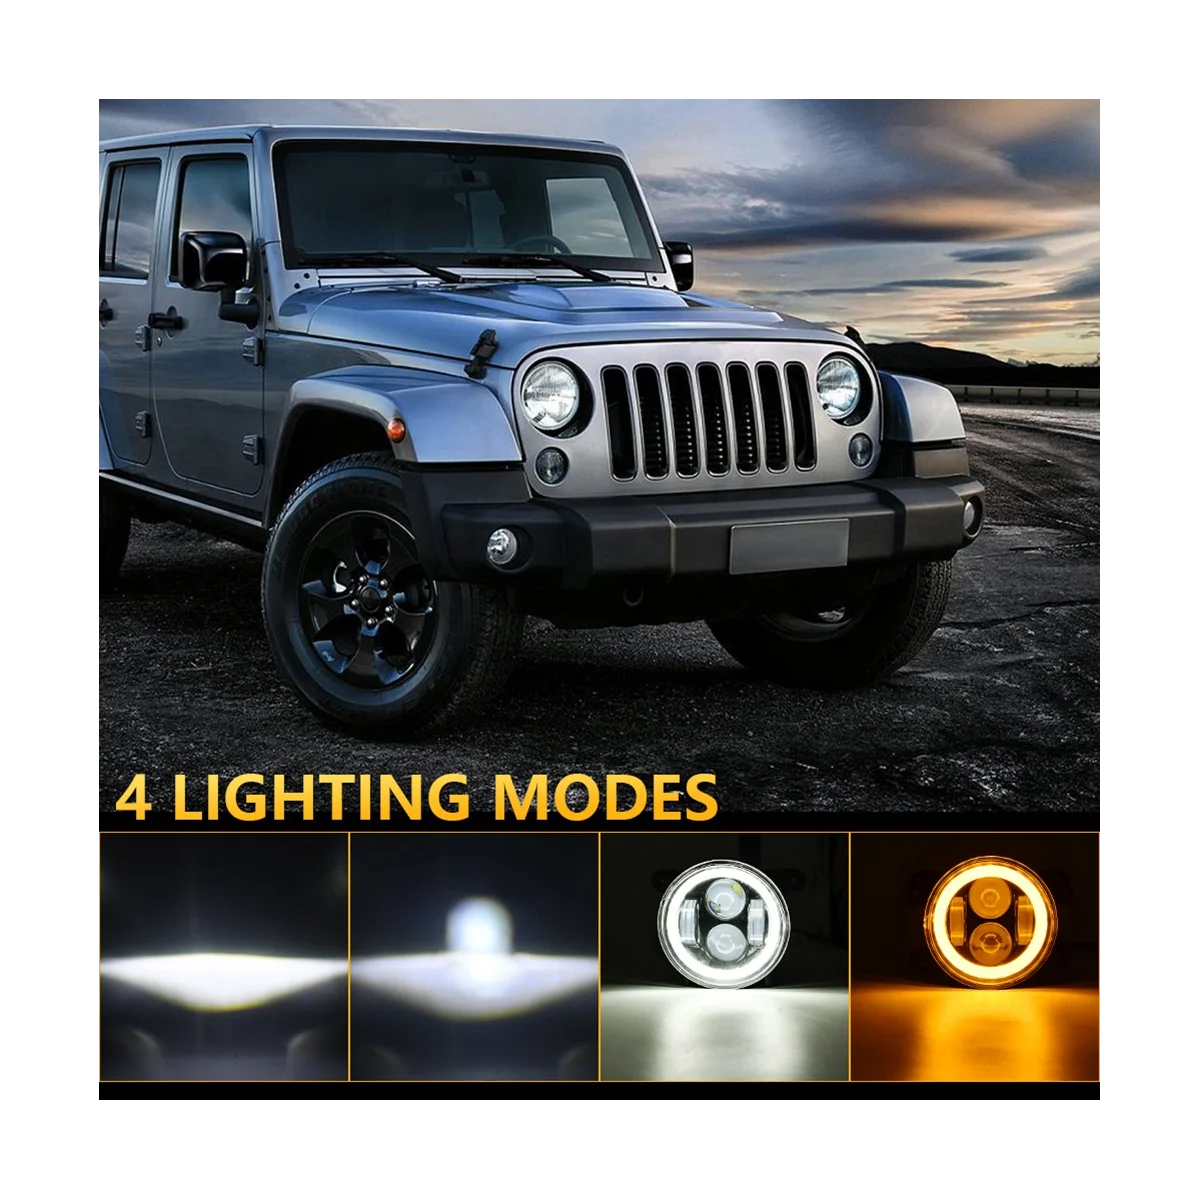 

4Inch Car Fog Light 20000LM 200W High/Low Beam Waterproof for Jeep Wrangler JK Dodge Journey Magnum - White+Yellow